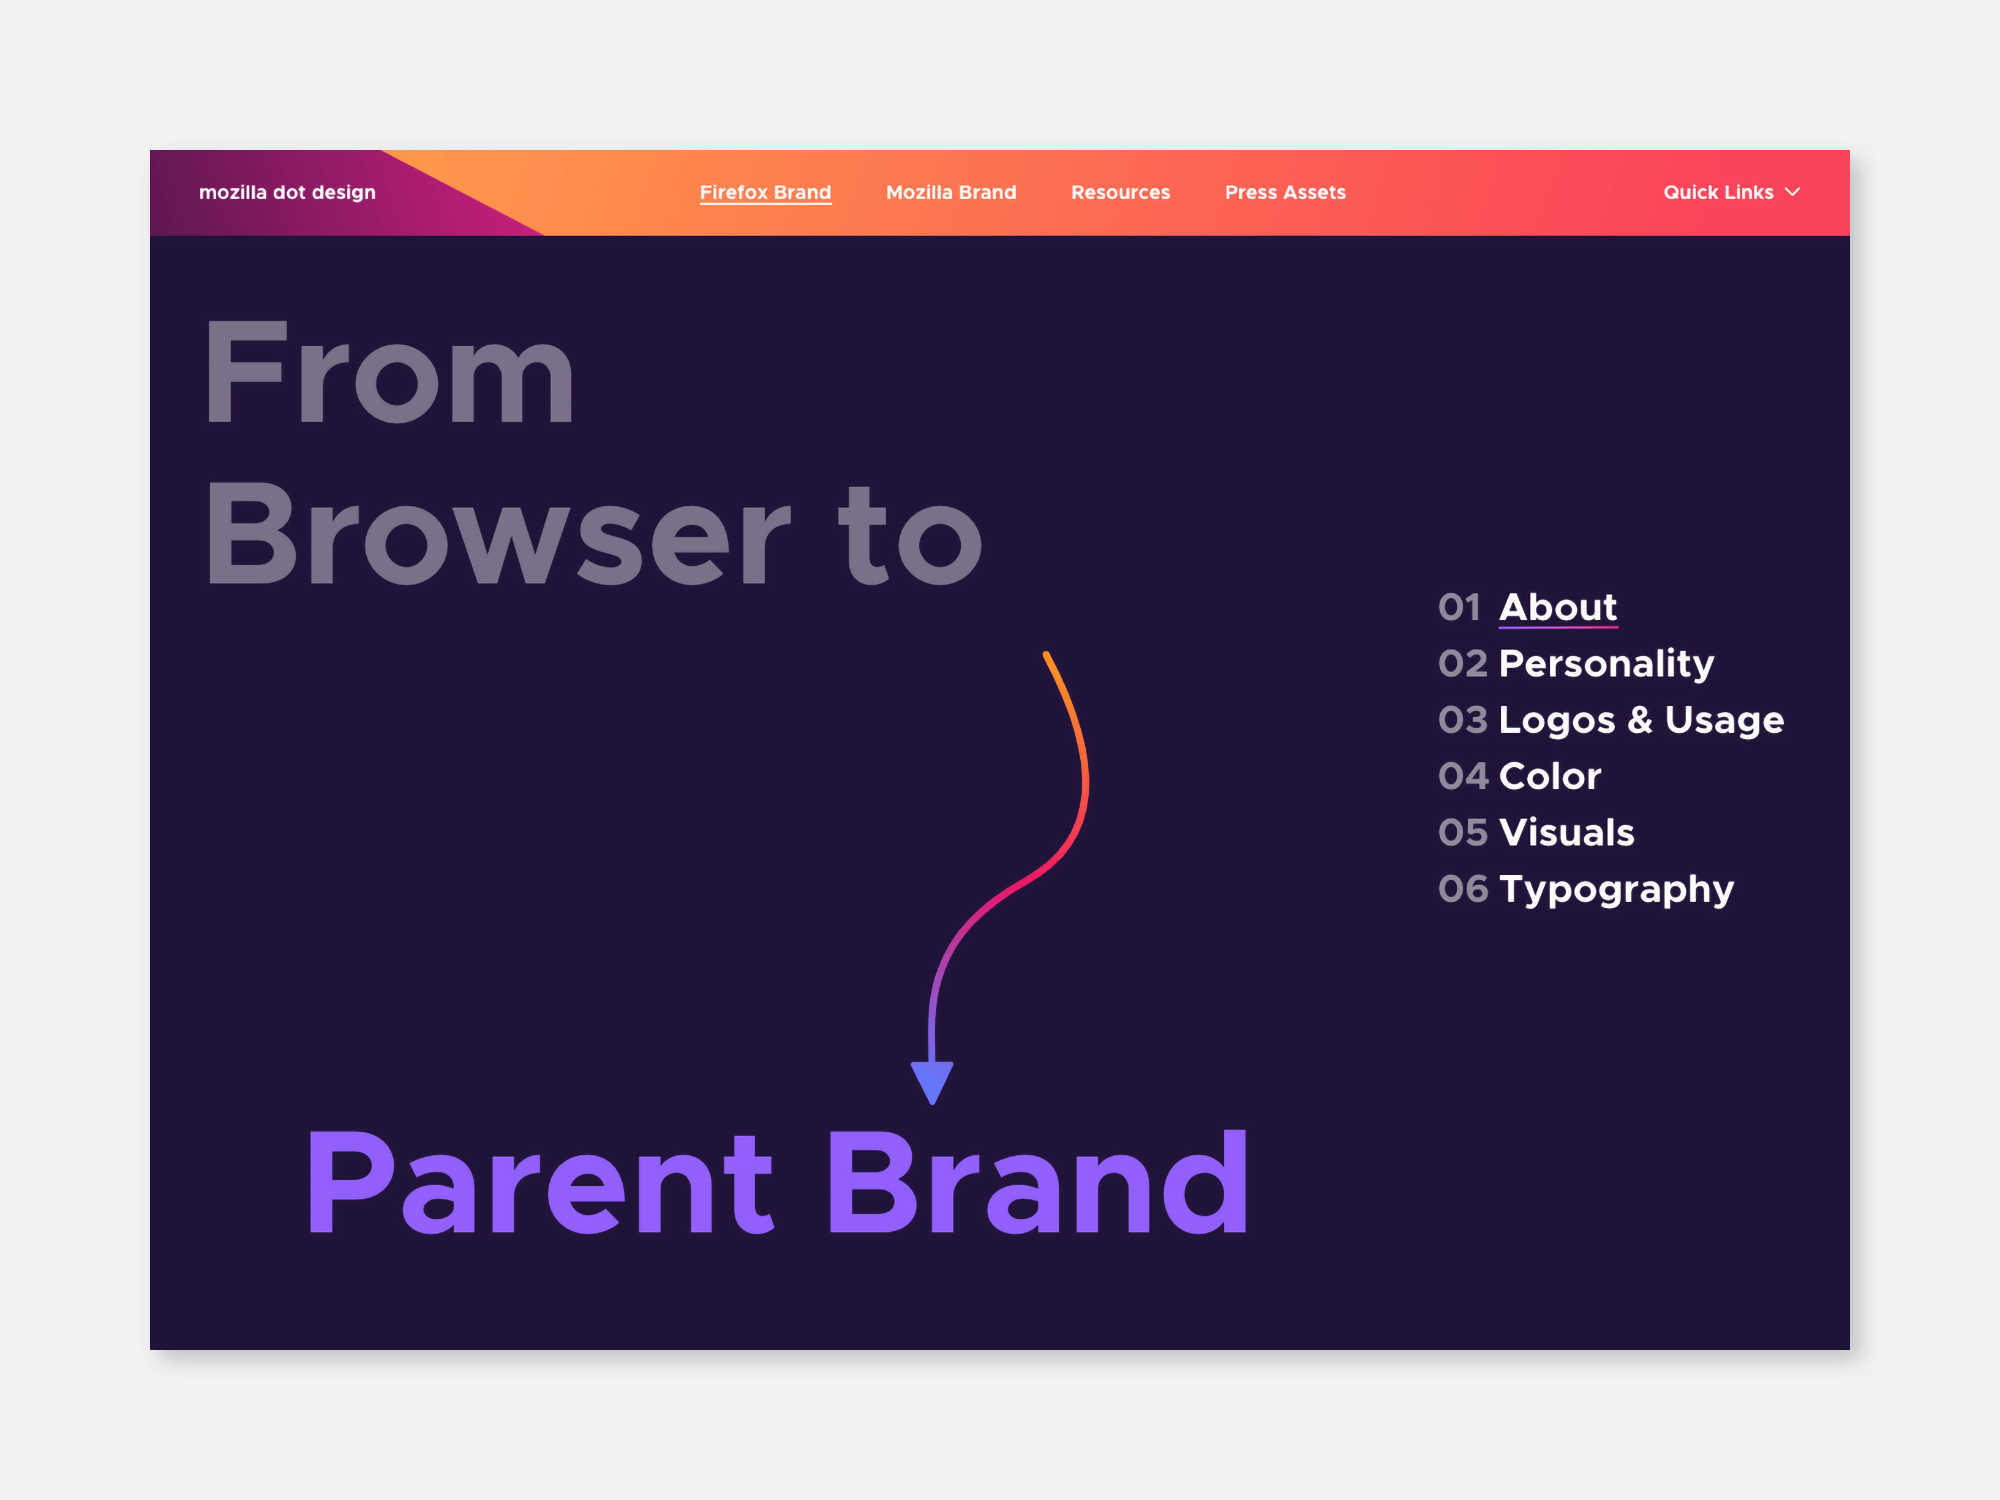 About section for the Firefox brand